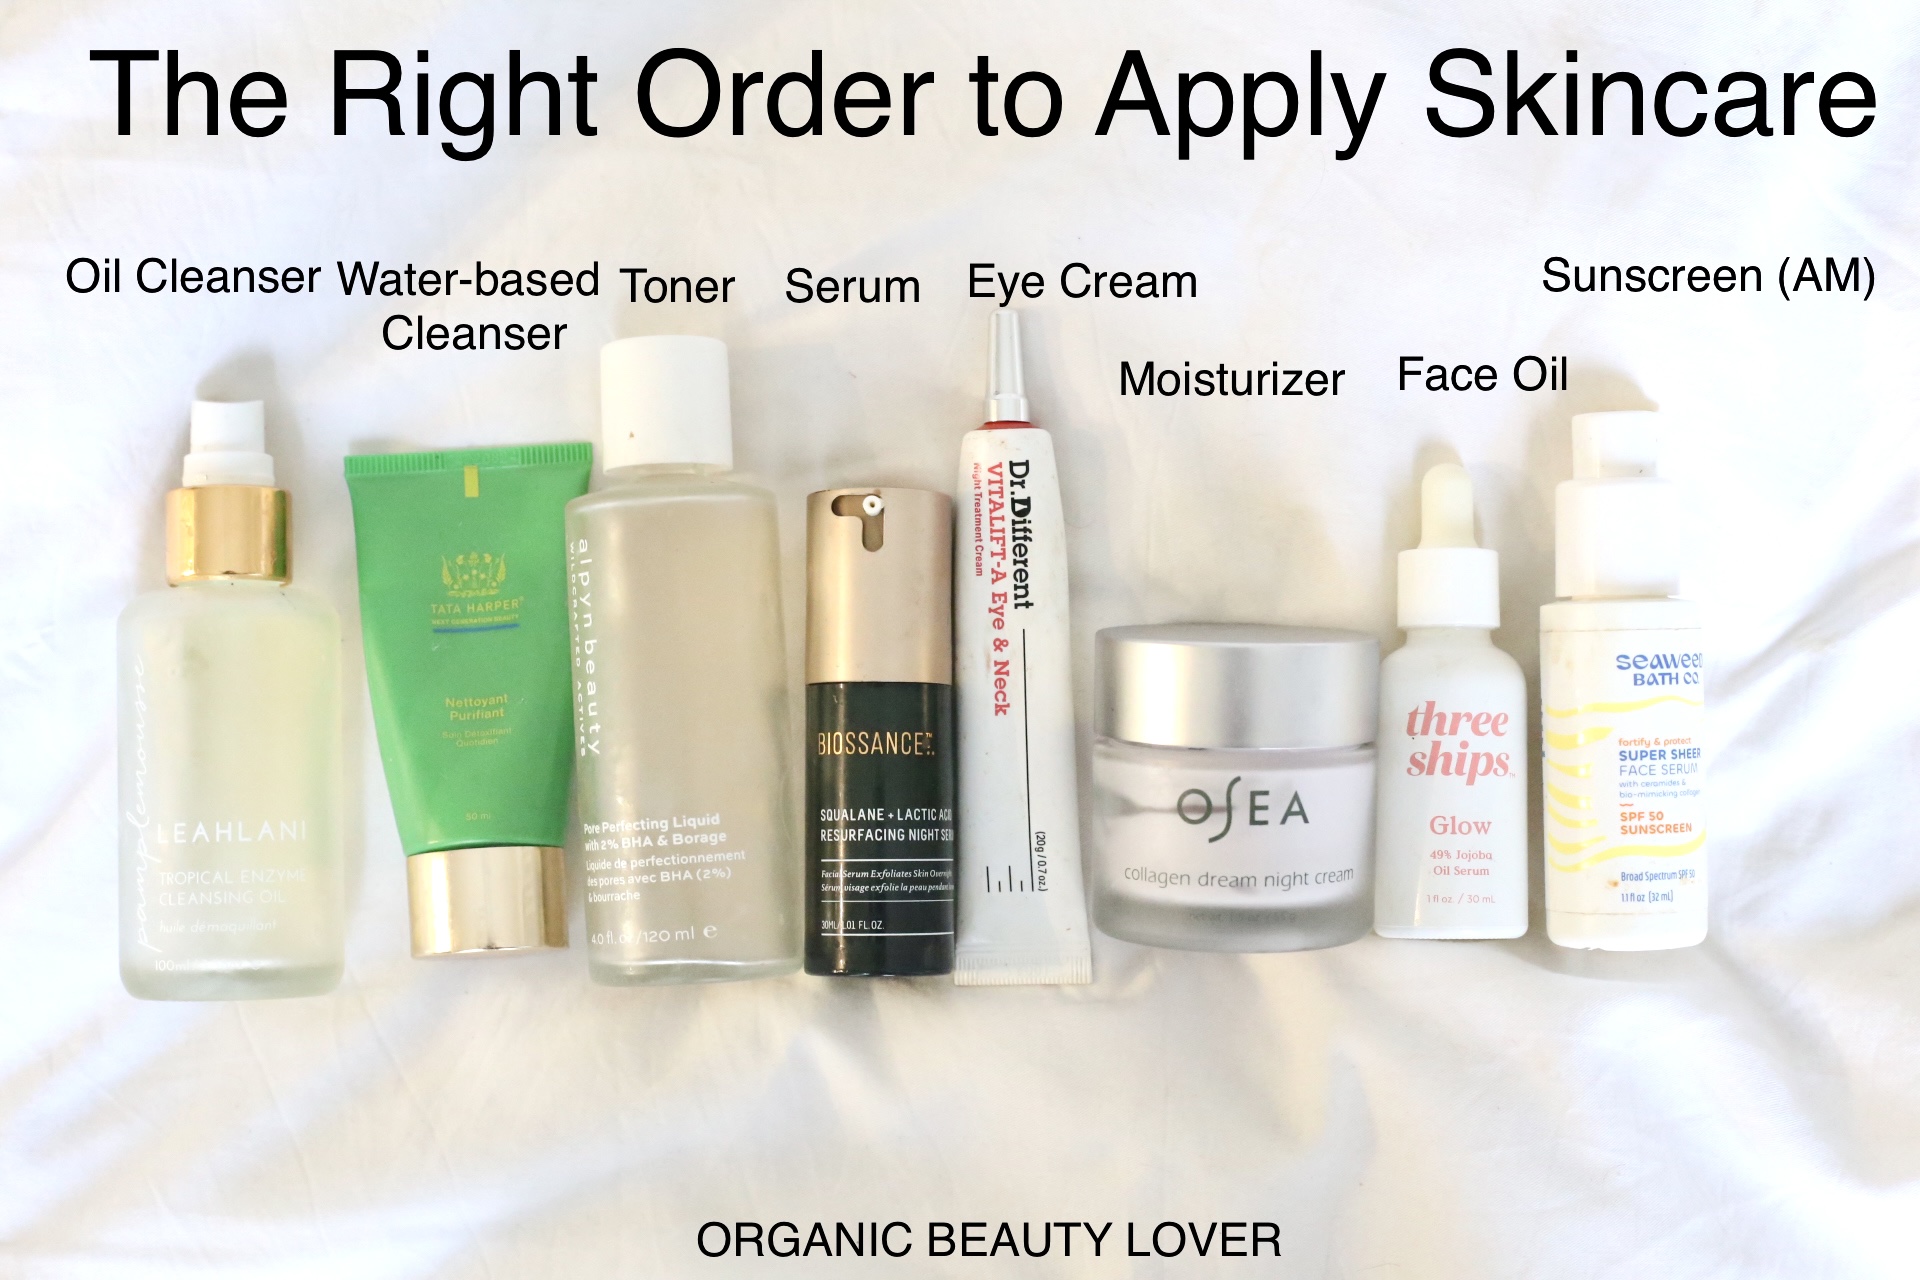 The Right Order to Apply Skincare